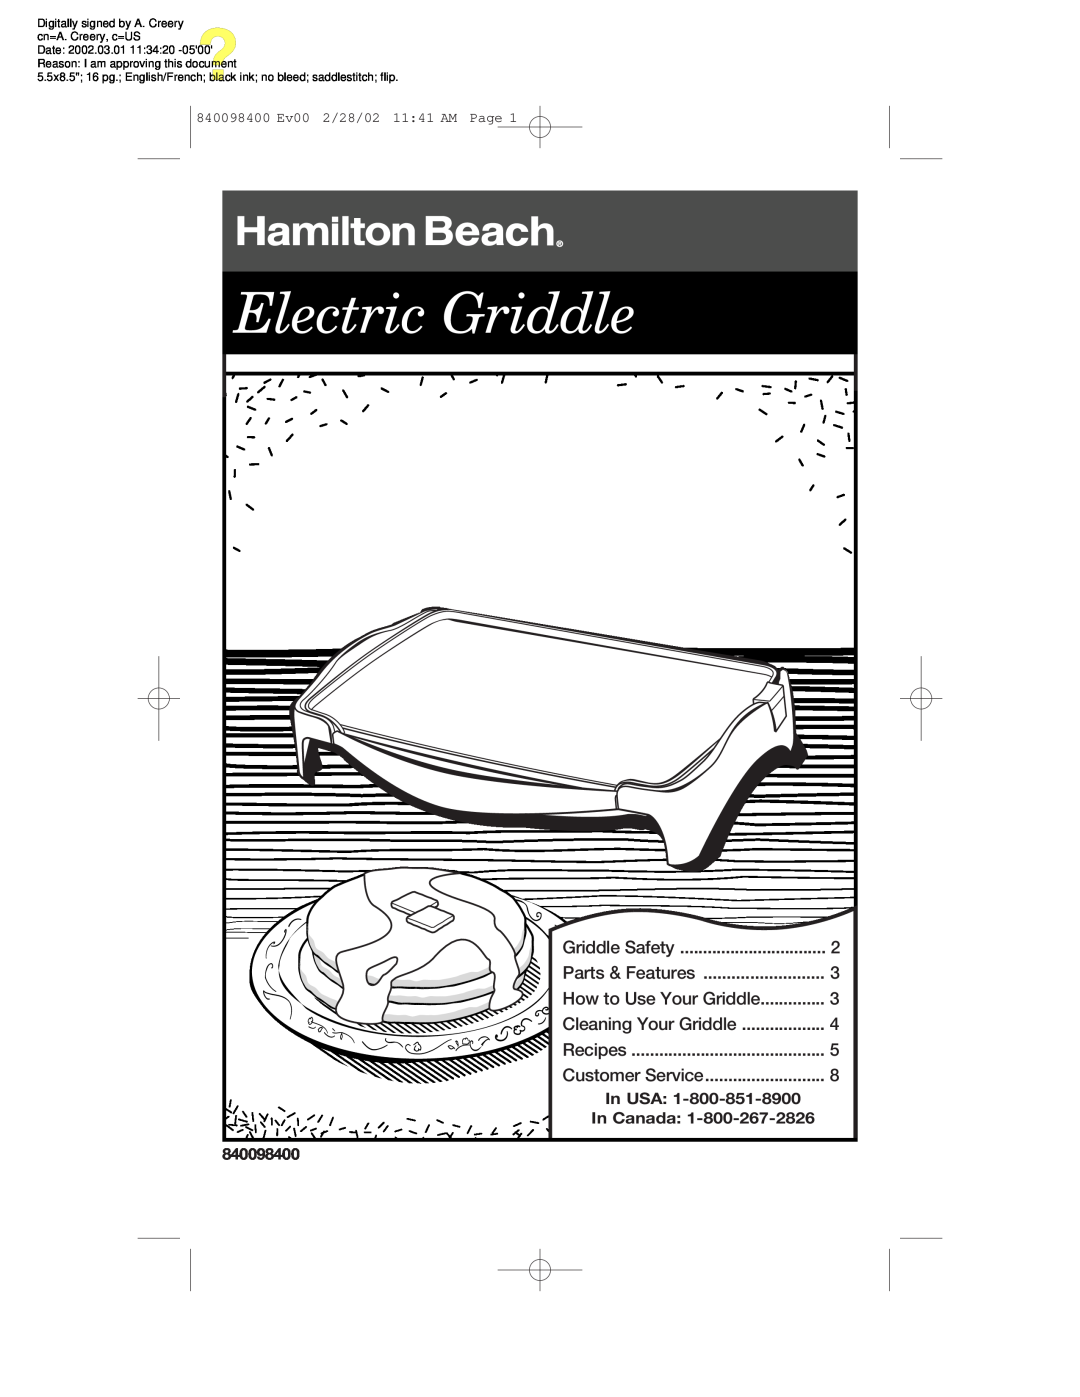 Hamilton Beach Electric Griddle manual In USA, In Canada, 840098400 Ev00 2/28/02 11 41 AM Page, Date 